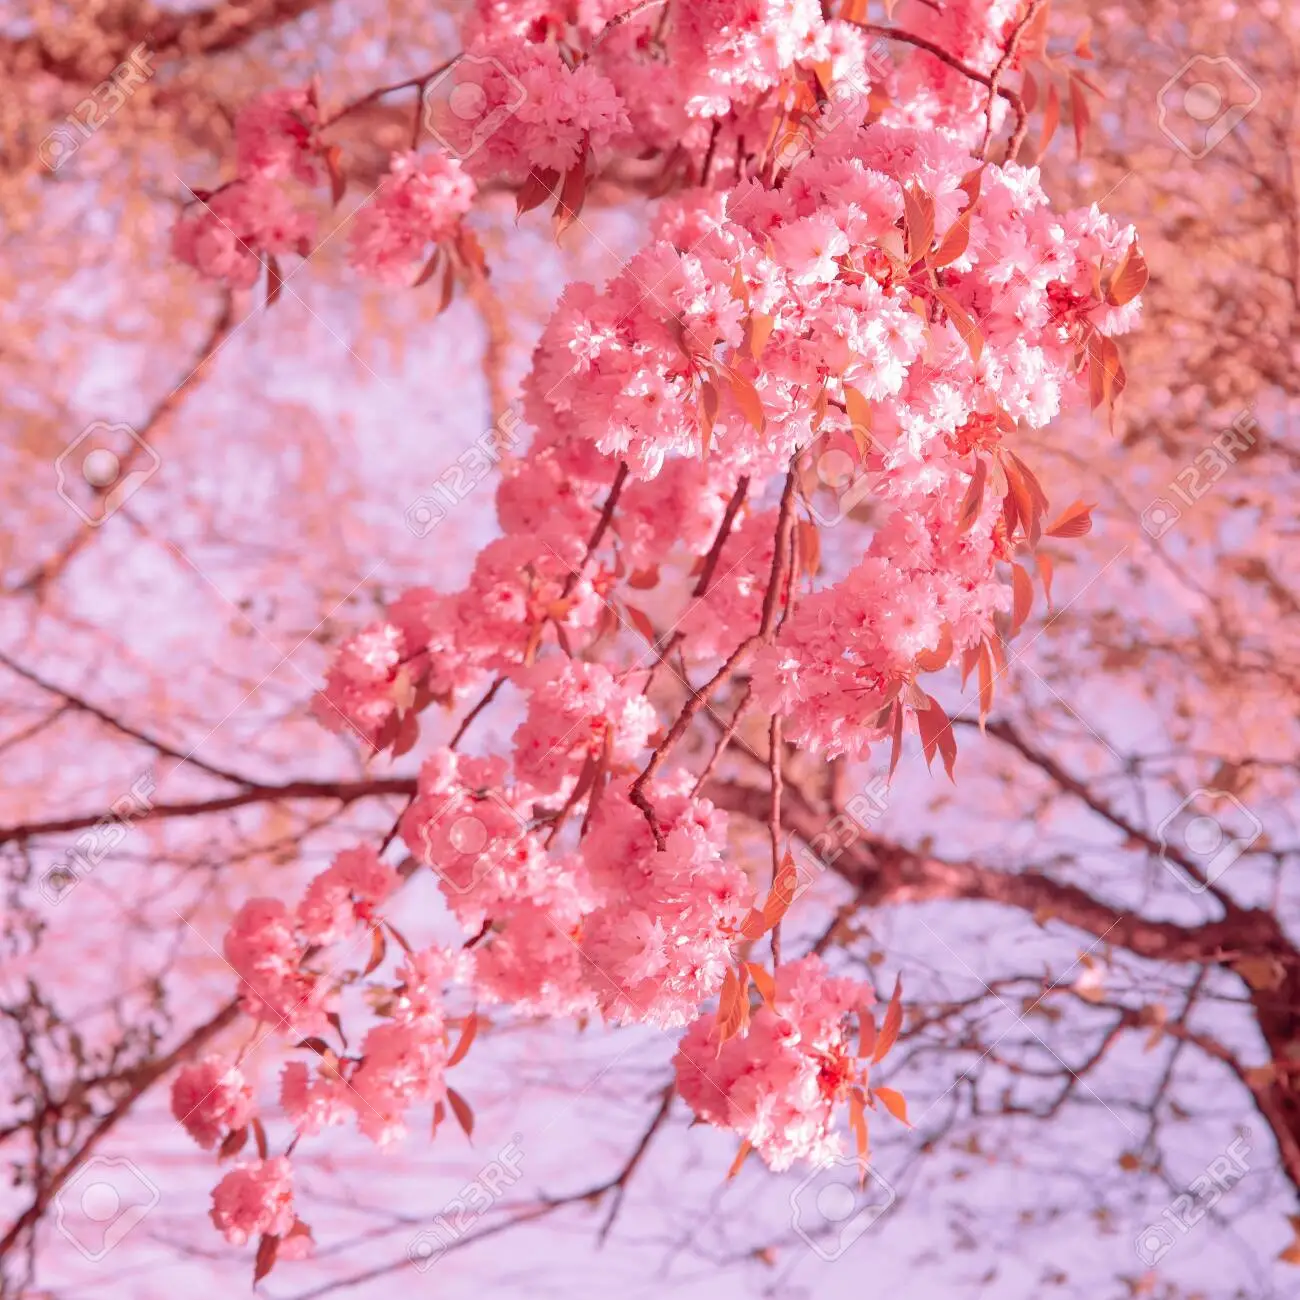 Cherry Blossom Photos, Download The BEST Free Cherry Blossom Stock